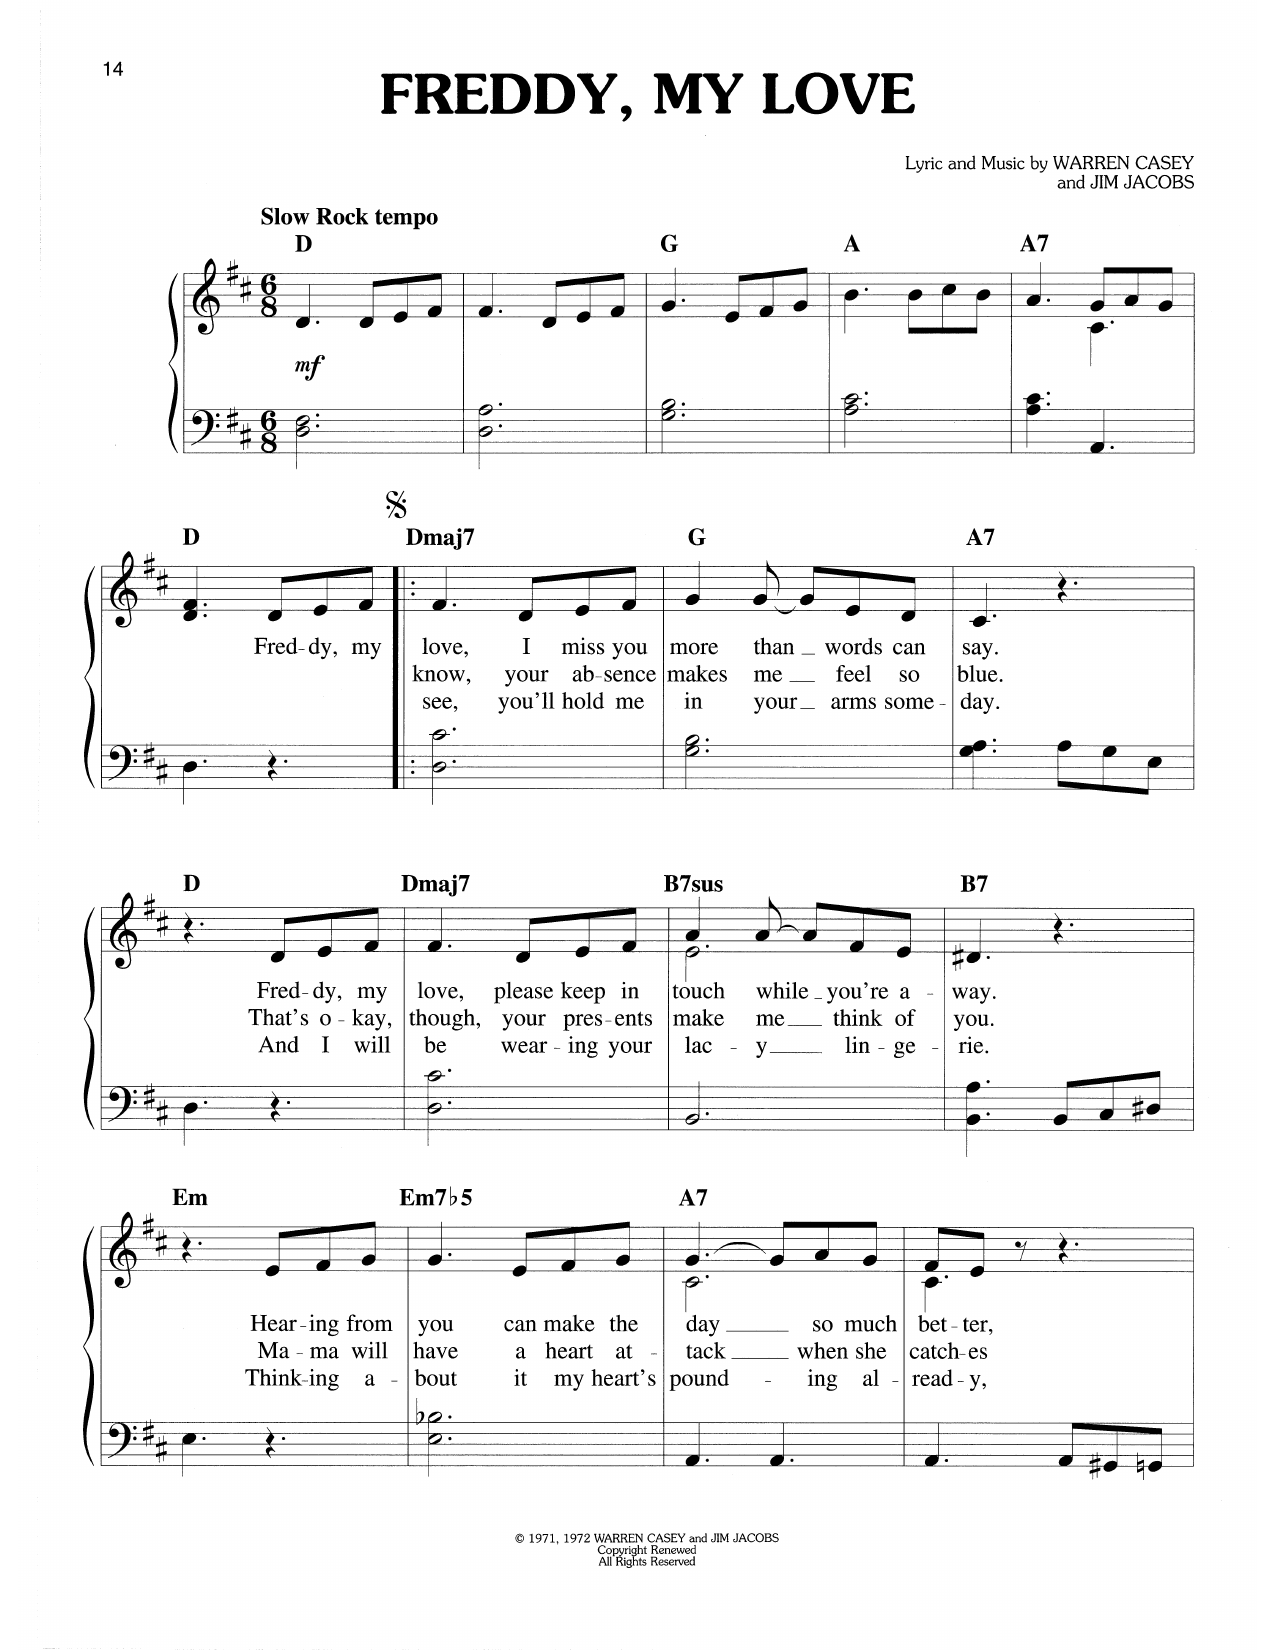 Download Warren Casey & Jim Jacobs Freddy, My Love (from Grease) Sheet Music